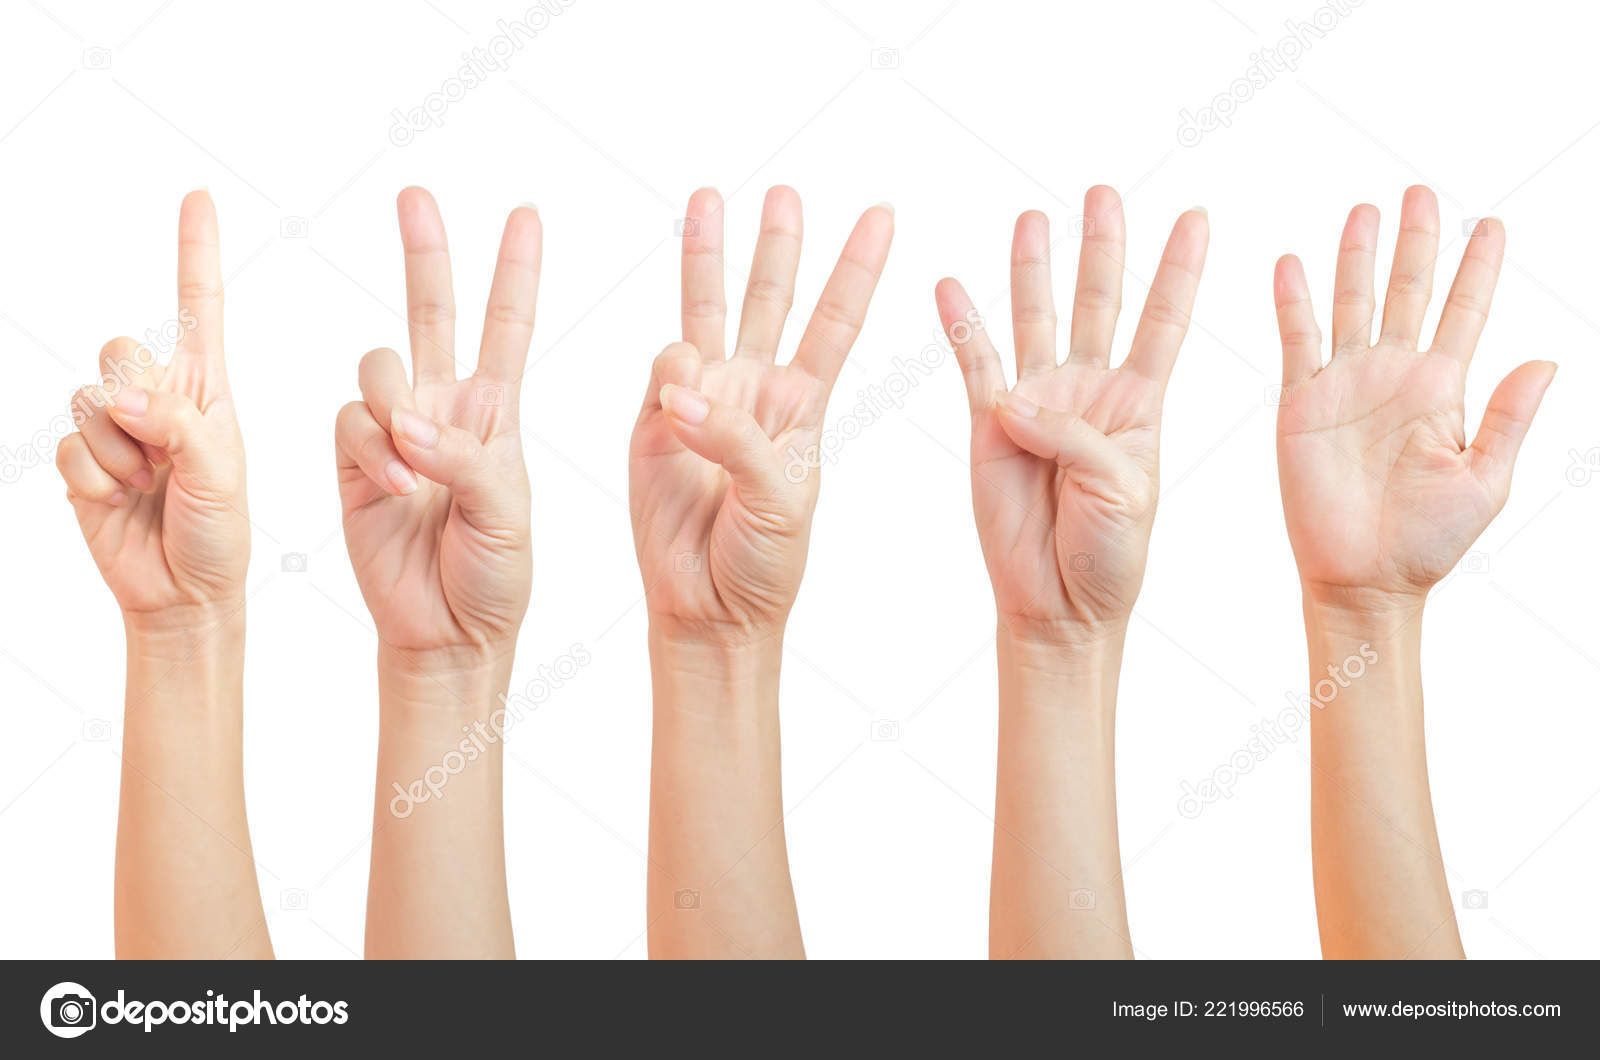 Hand count, gesture hand one, two, three, four, five, count to